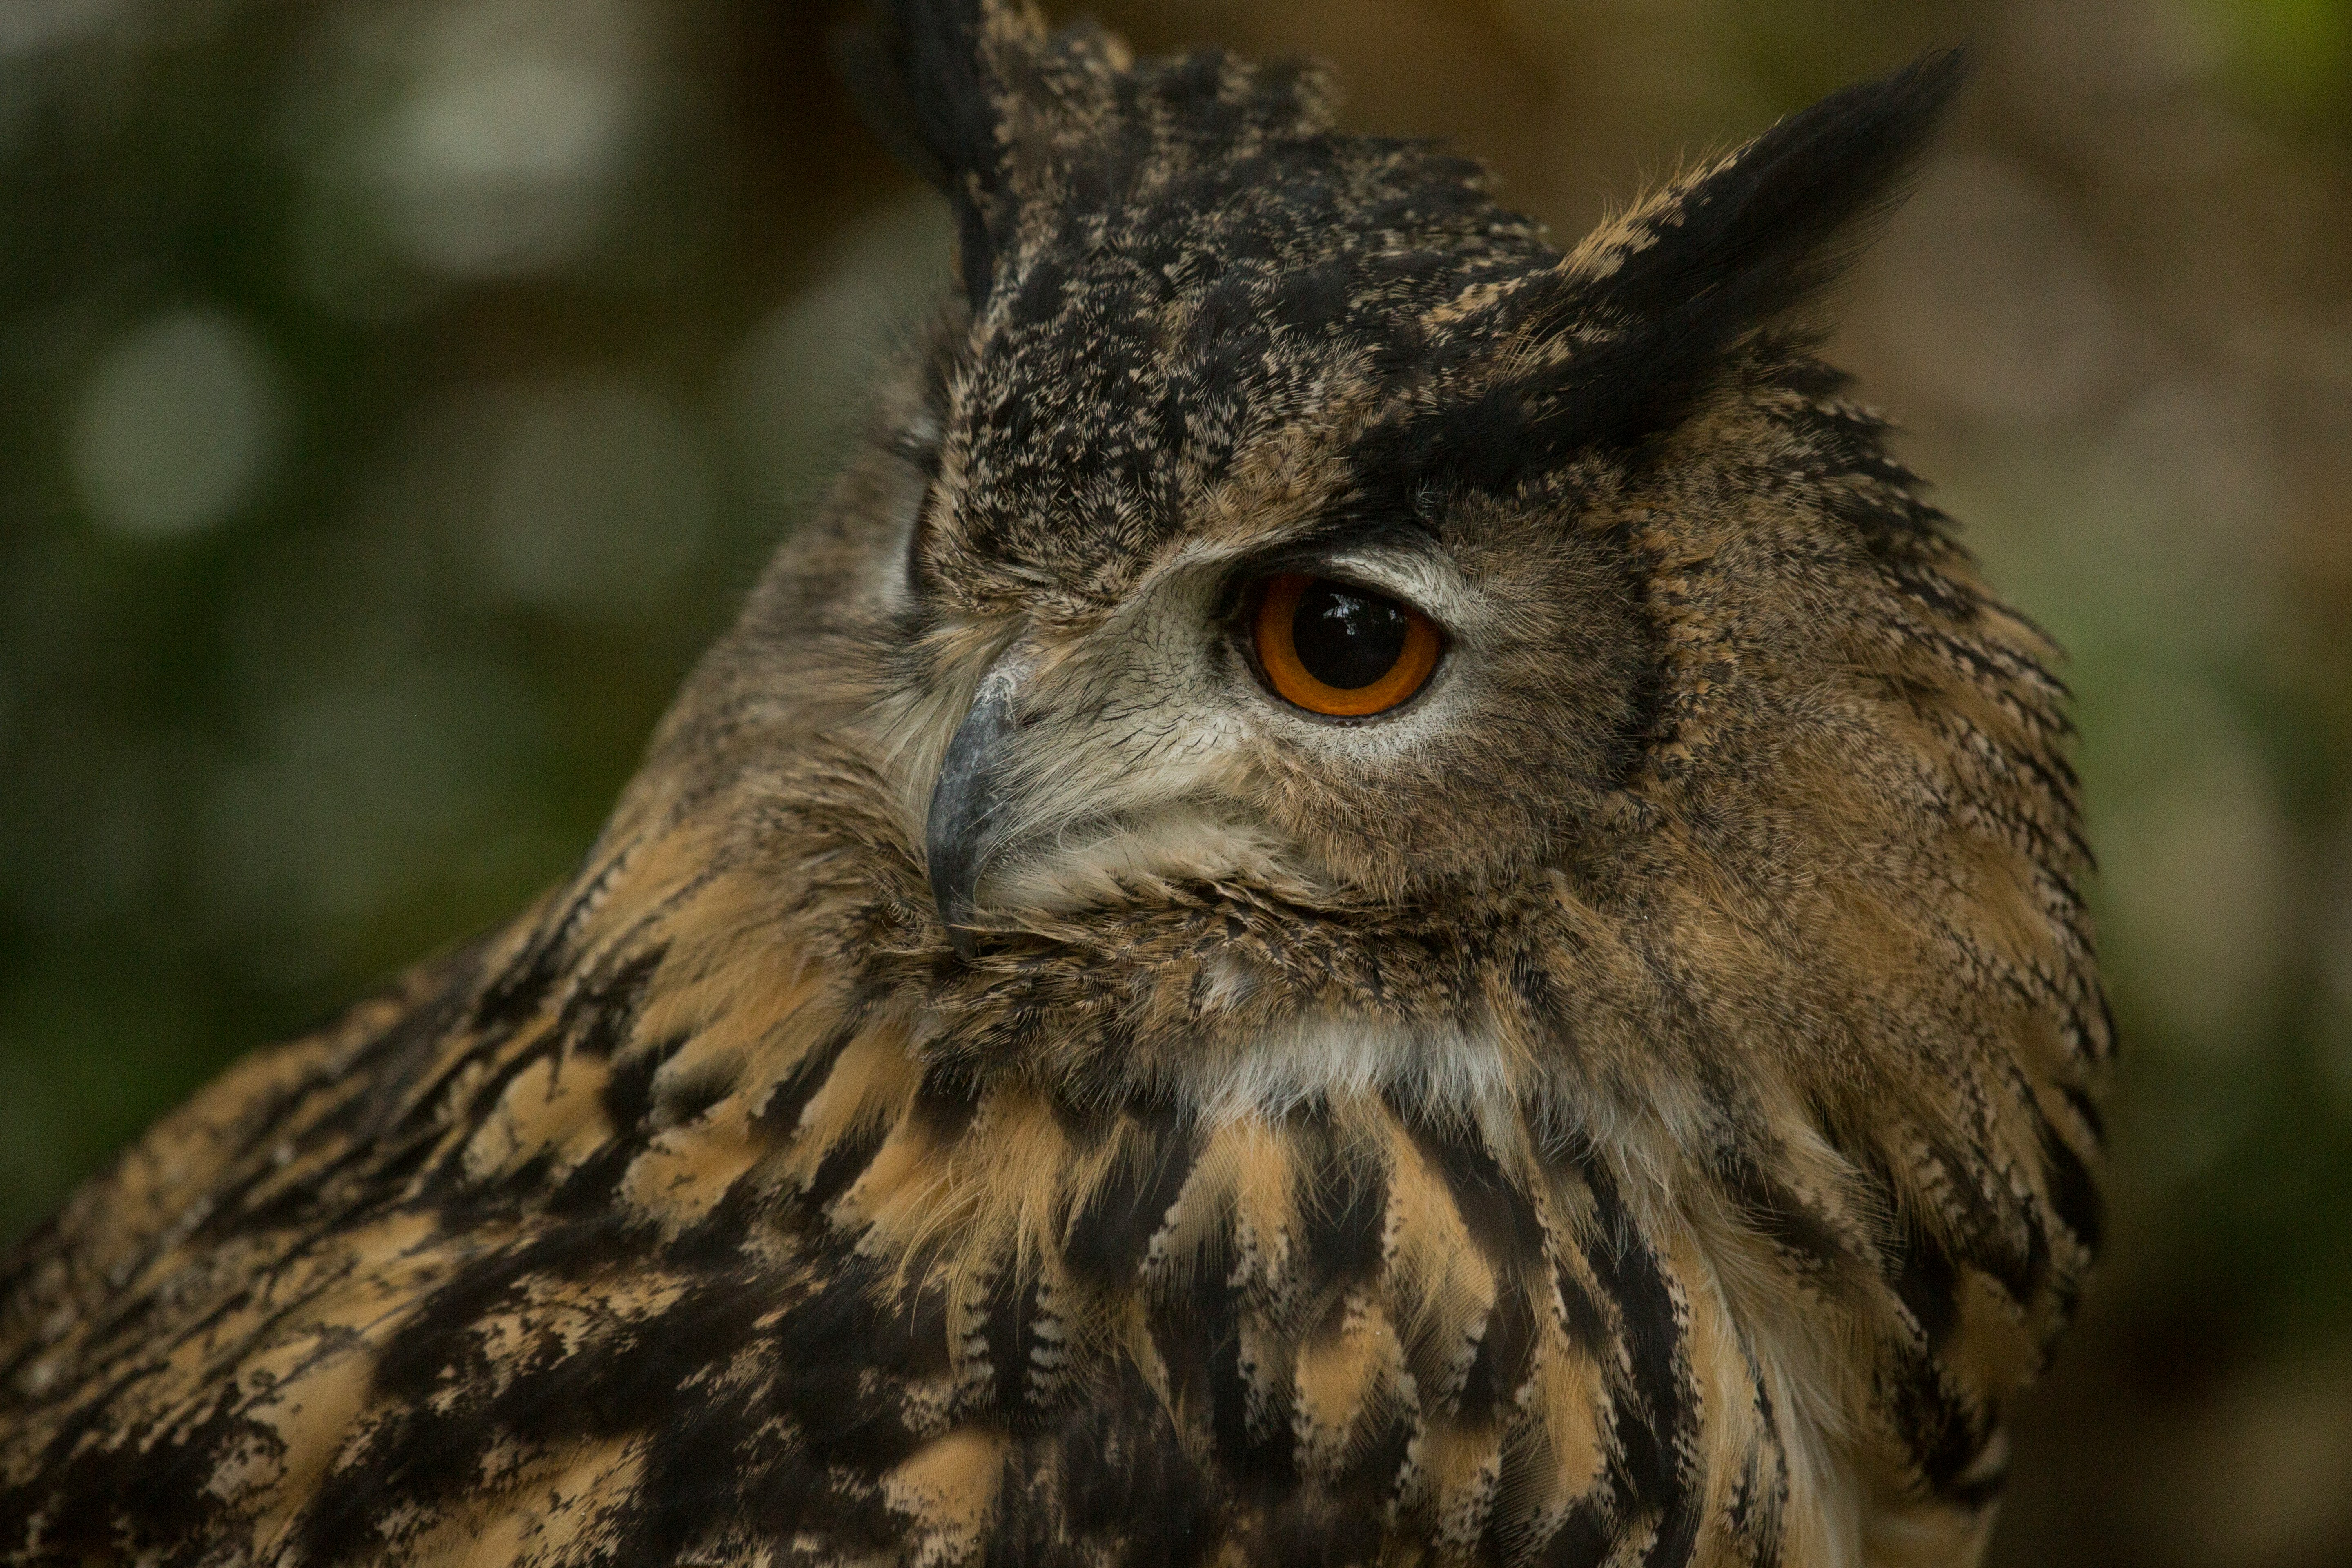 brown and black owl in close up photography